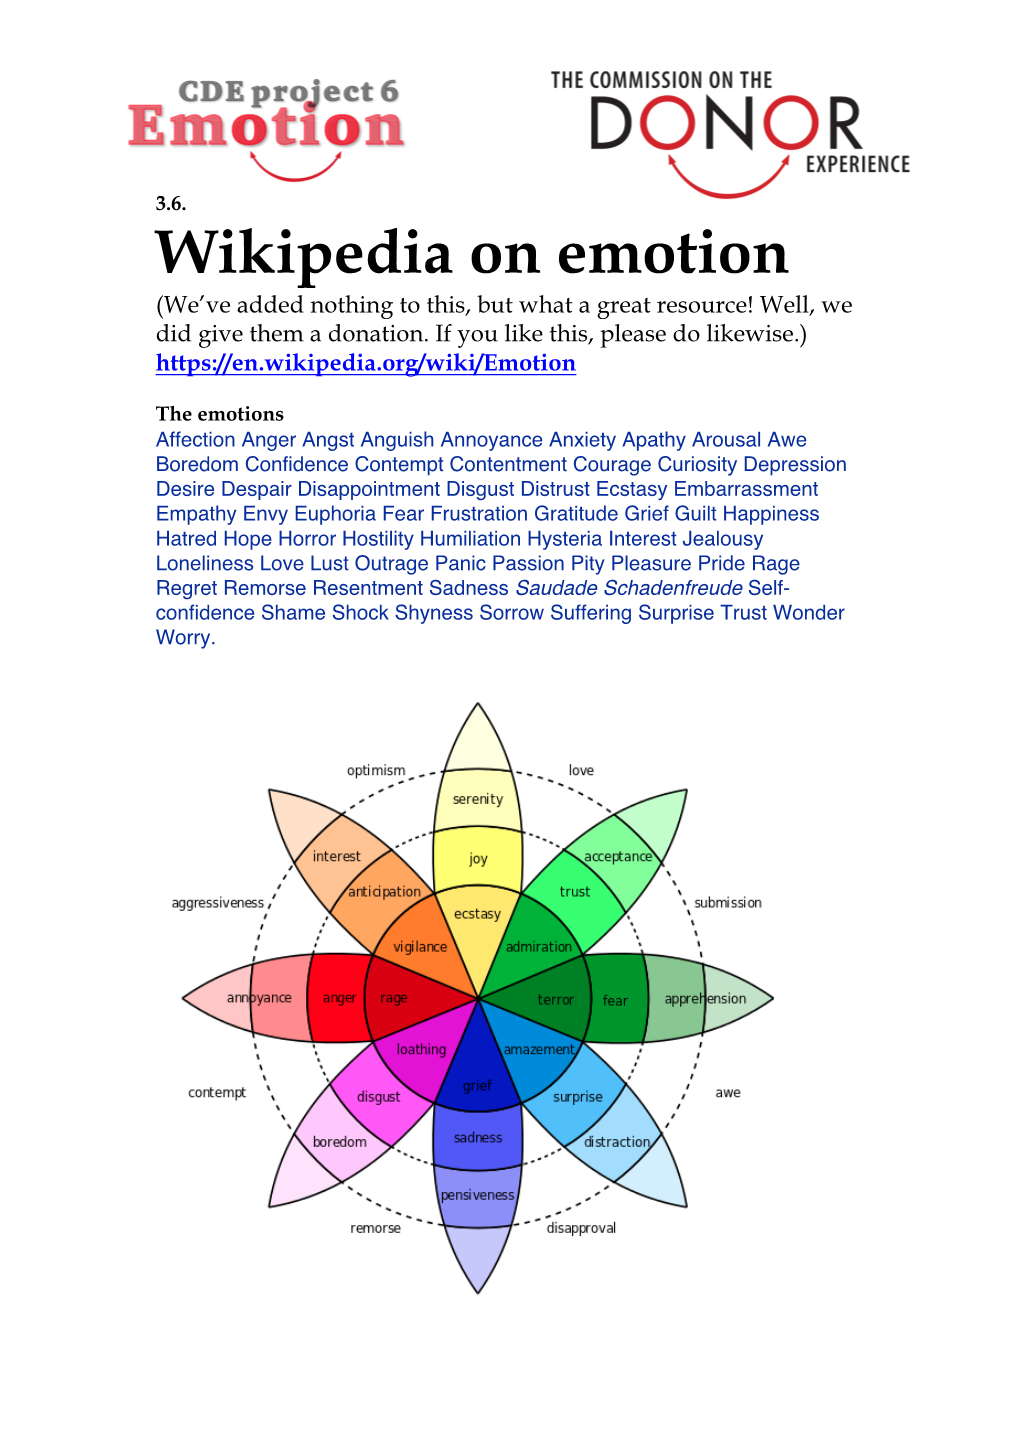 3.5. Wikipedia on Emotion. Unedited Useful Pointers